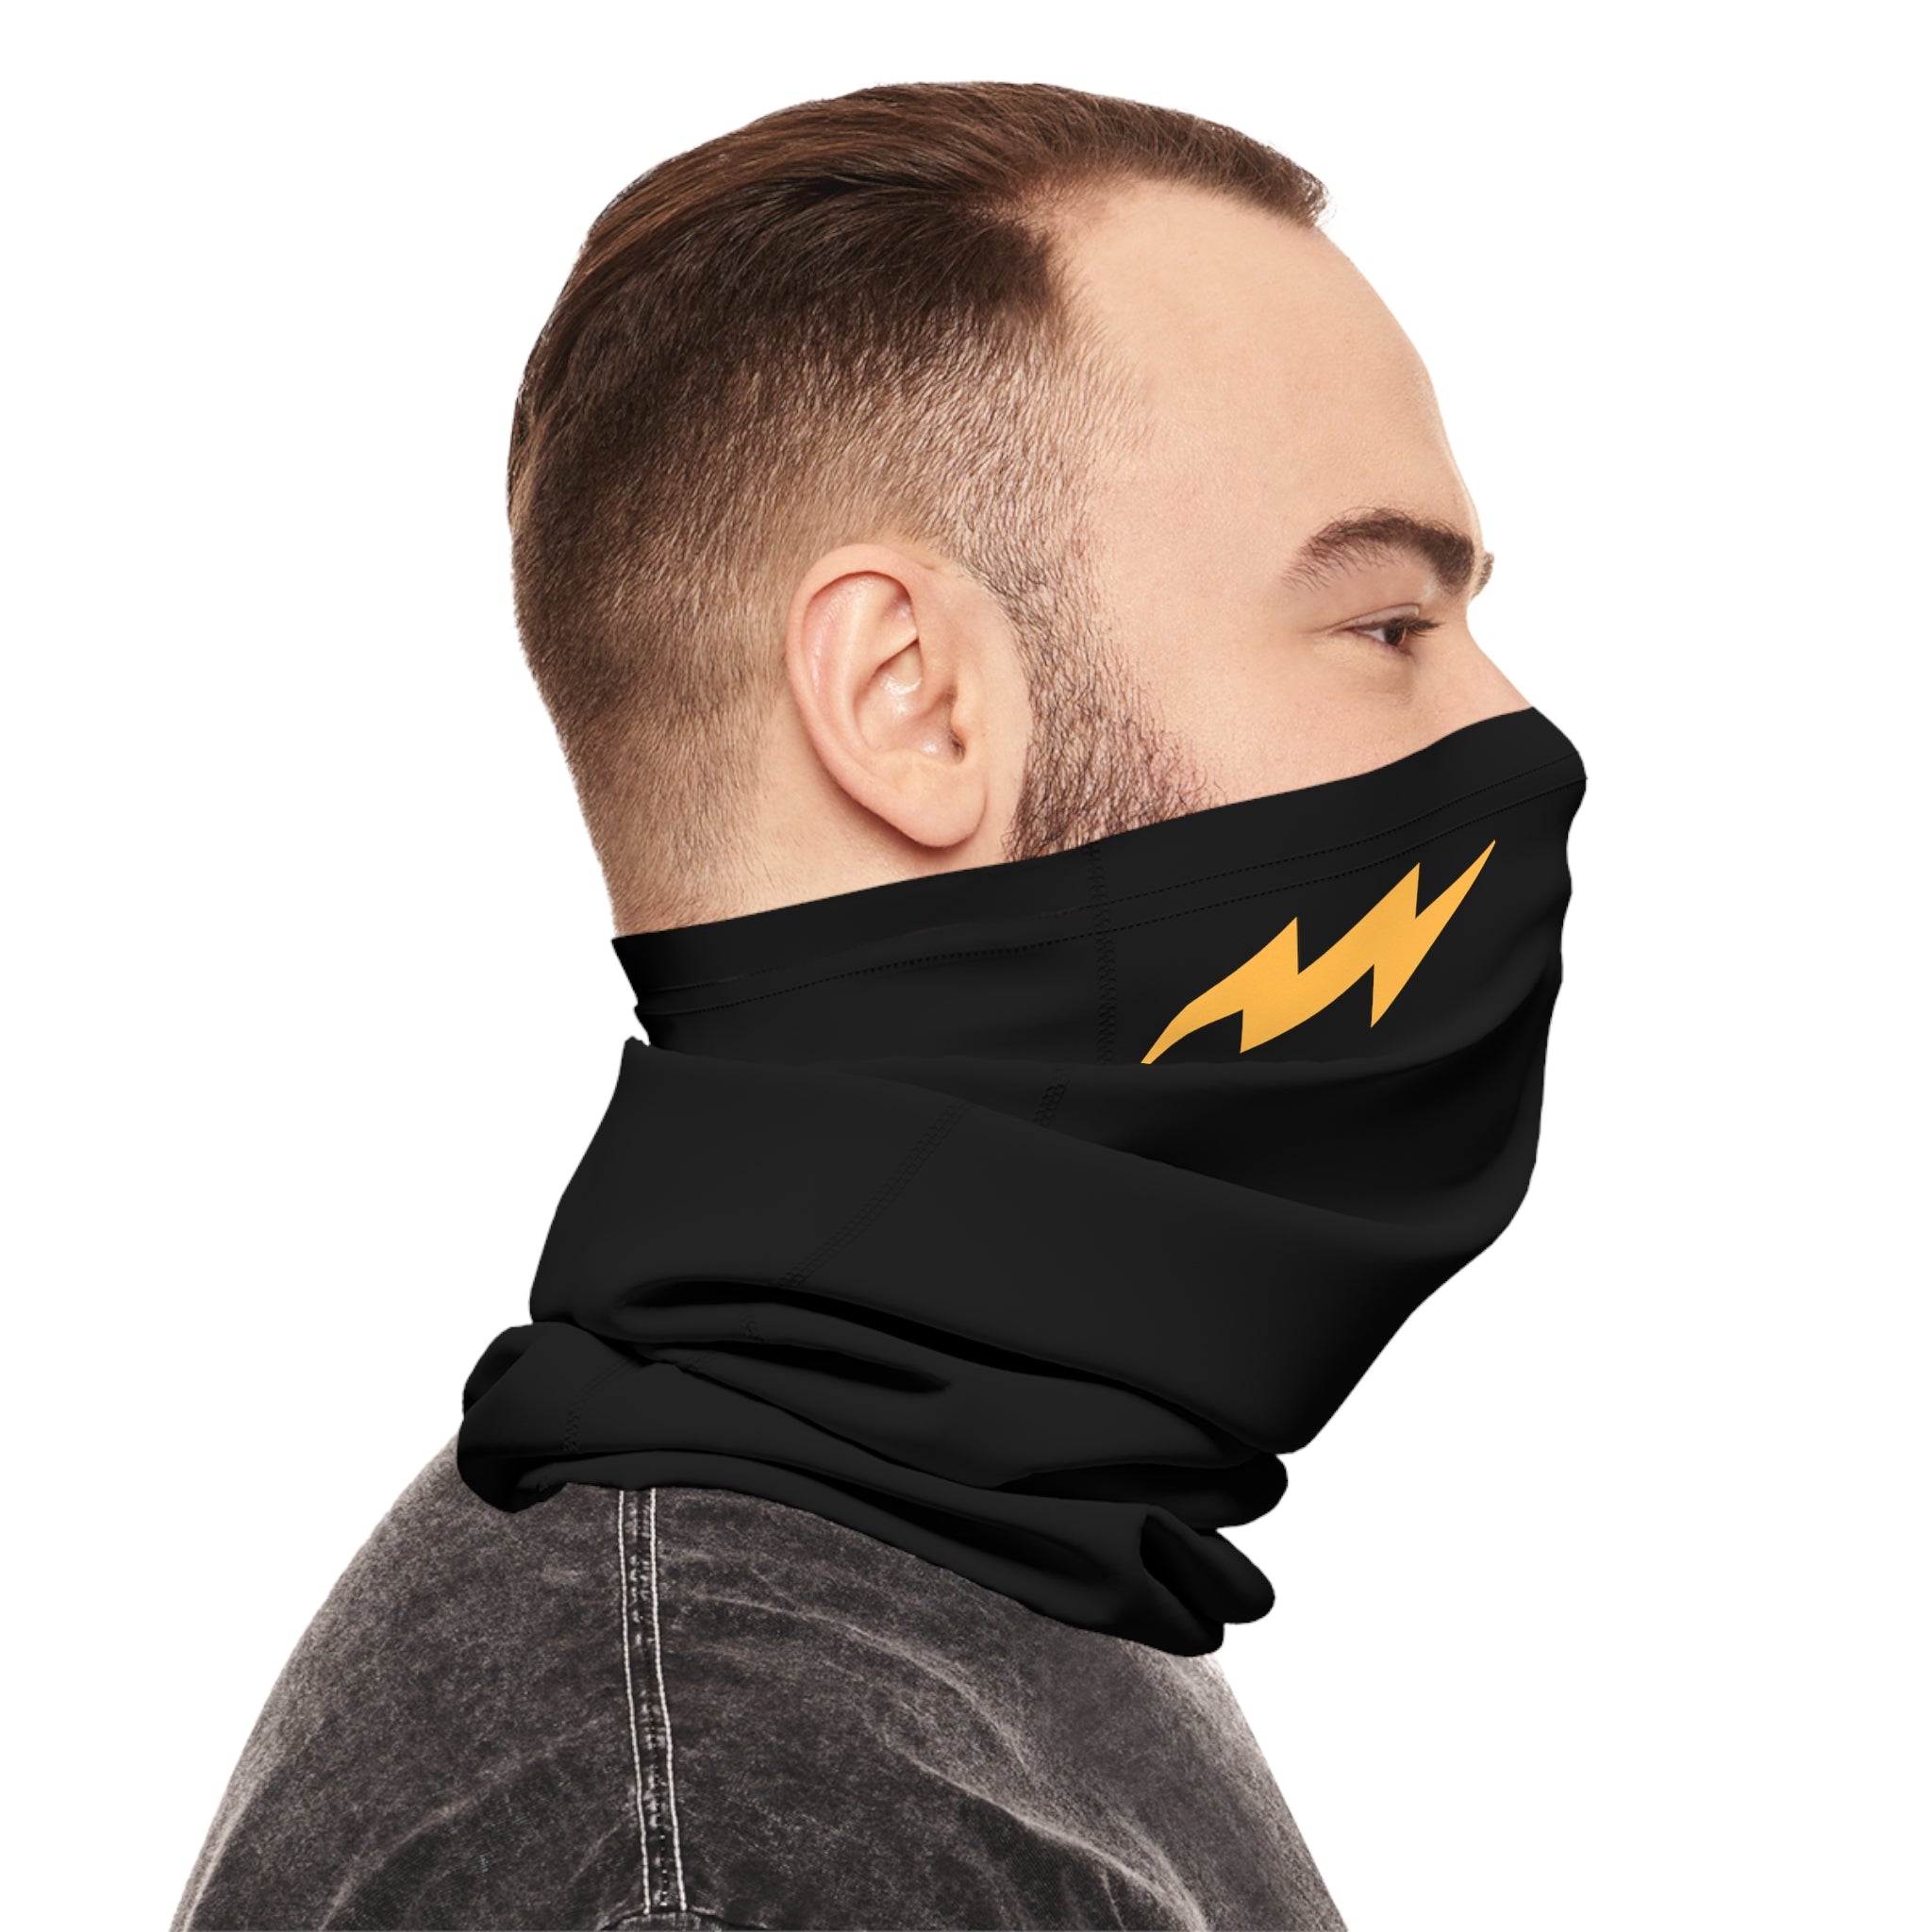 AMPED Off-Road Neck Gaiter - Pack of 2